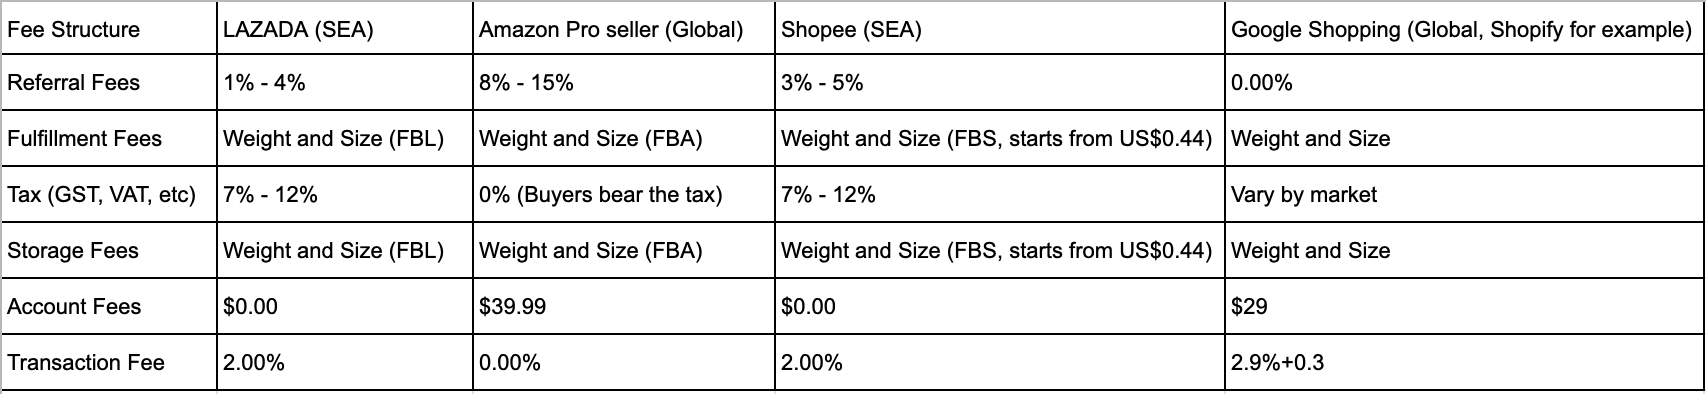 lazada and shopee fee structure